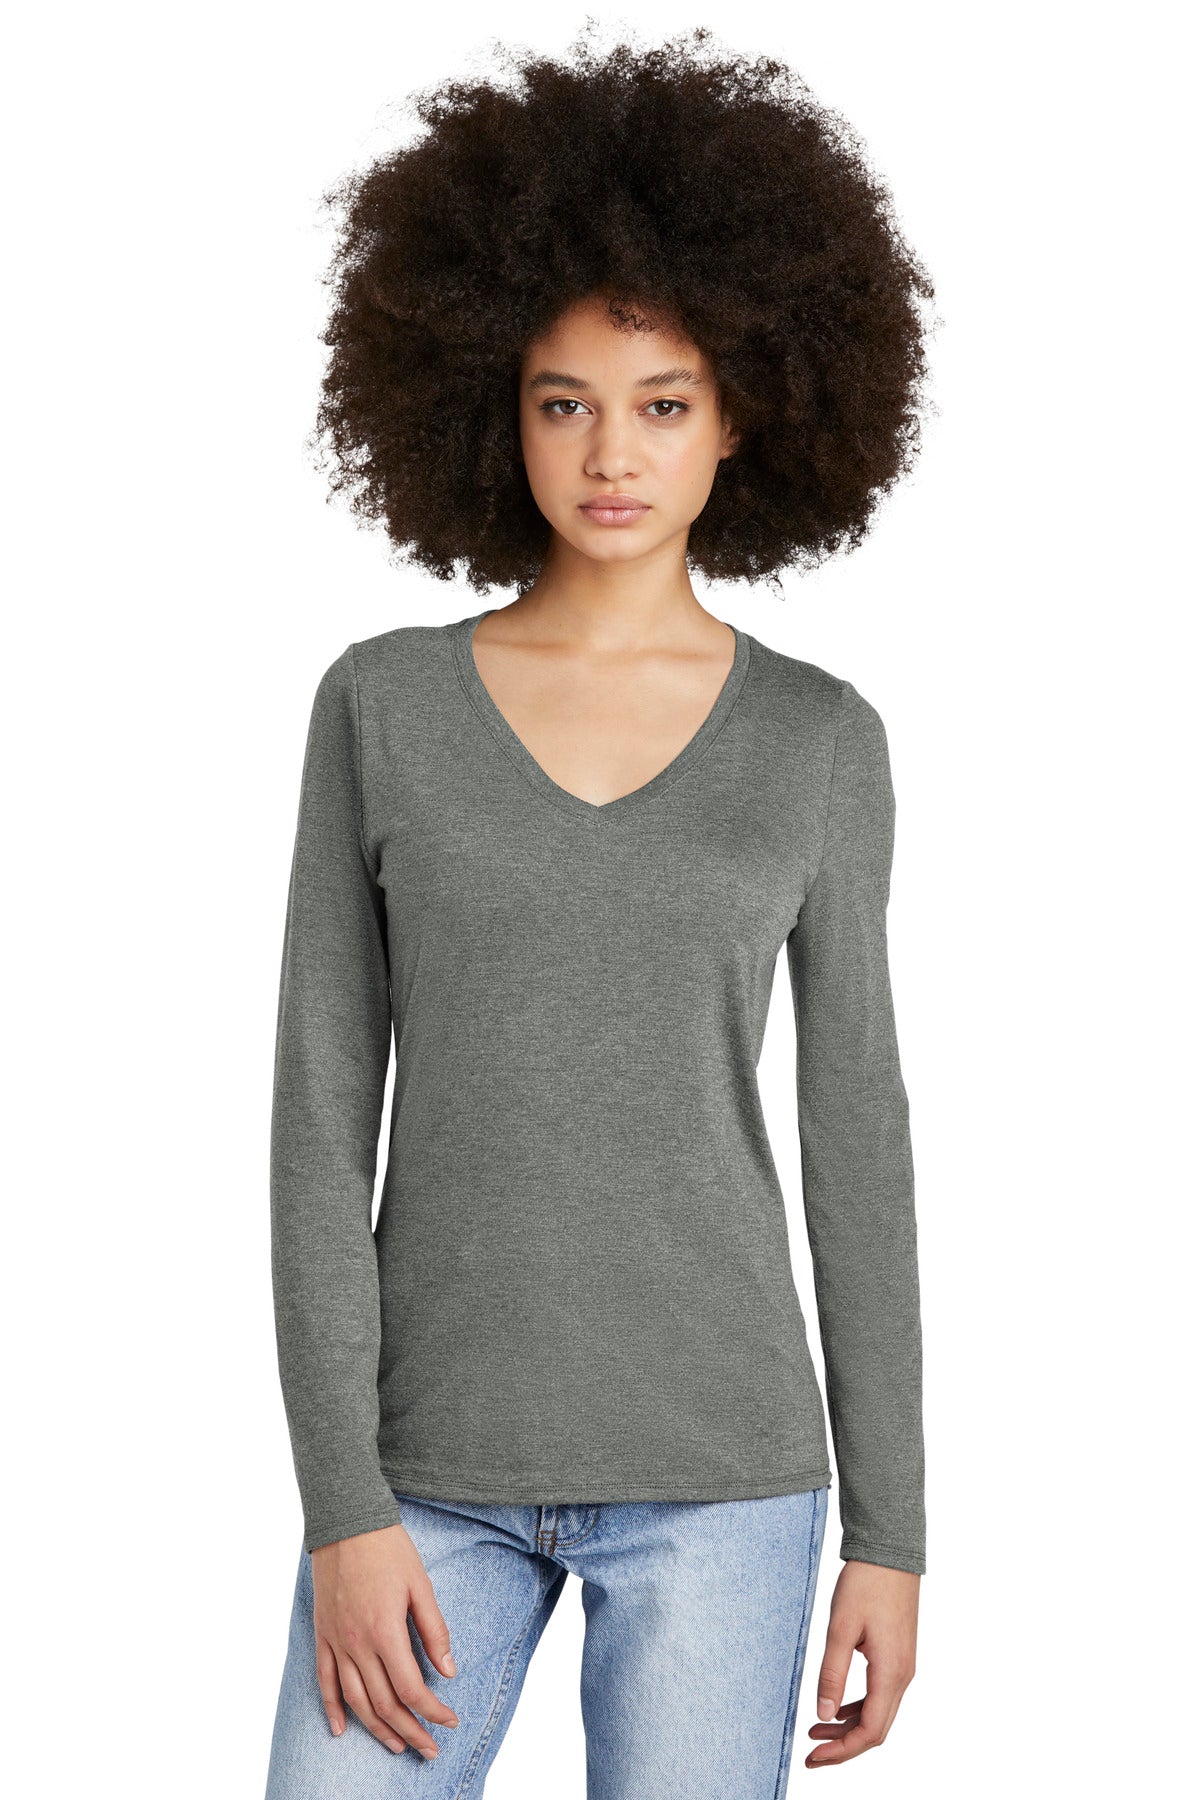 District® Women's Perfect Tri® Long Sleeve V-Neck Tee DT135